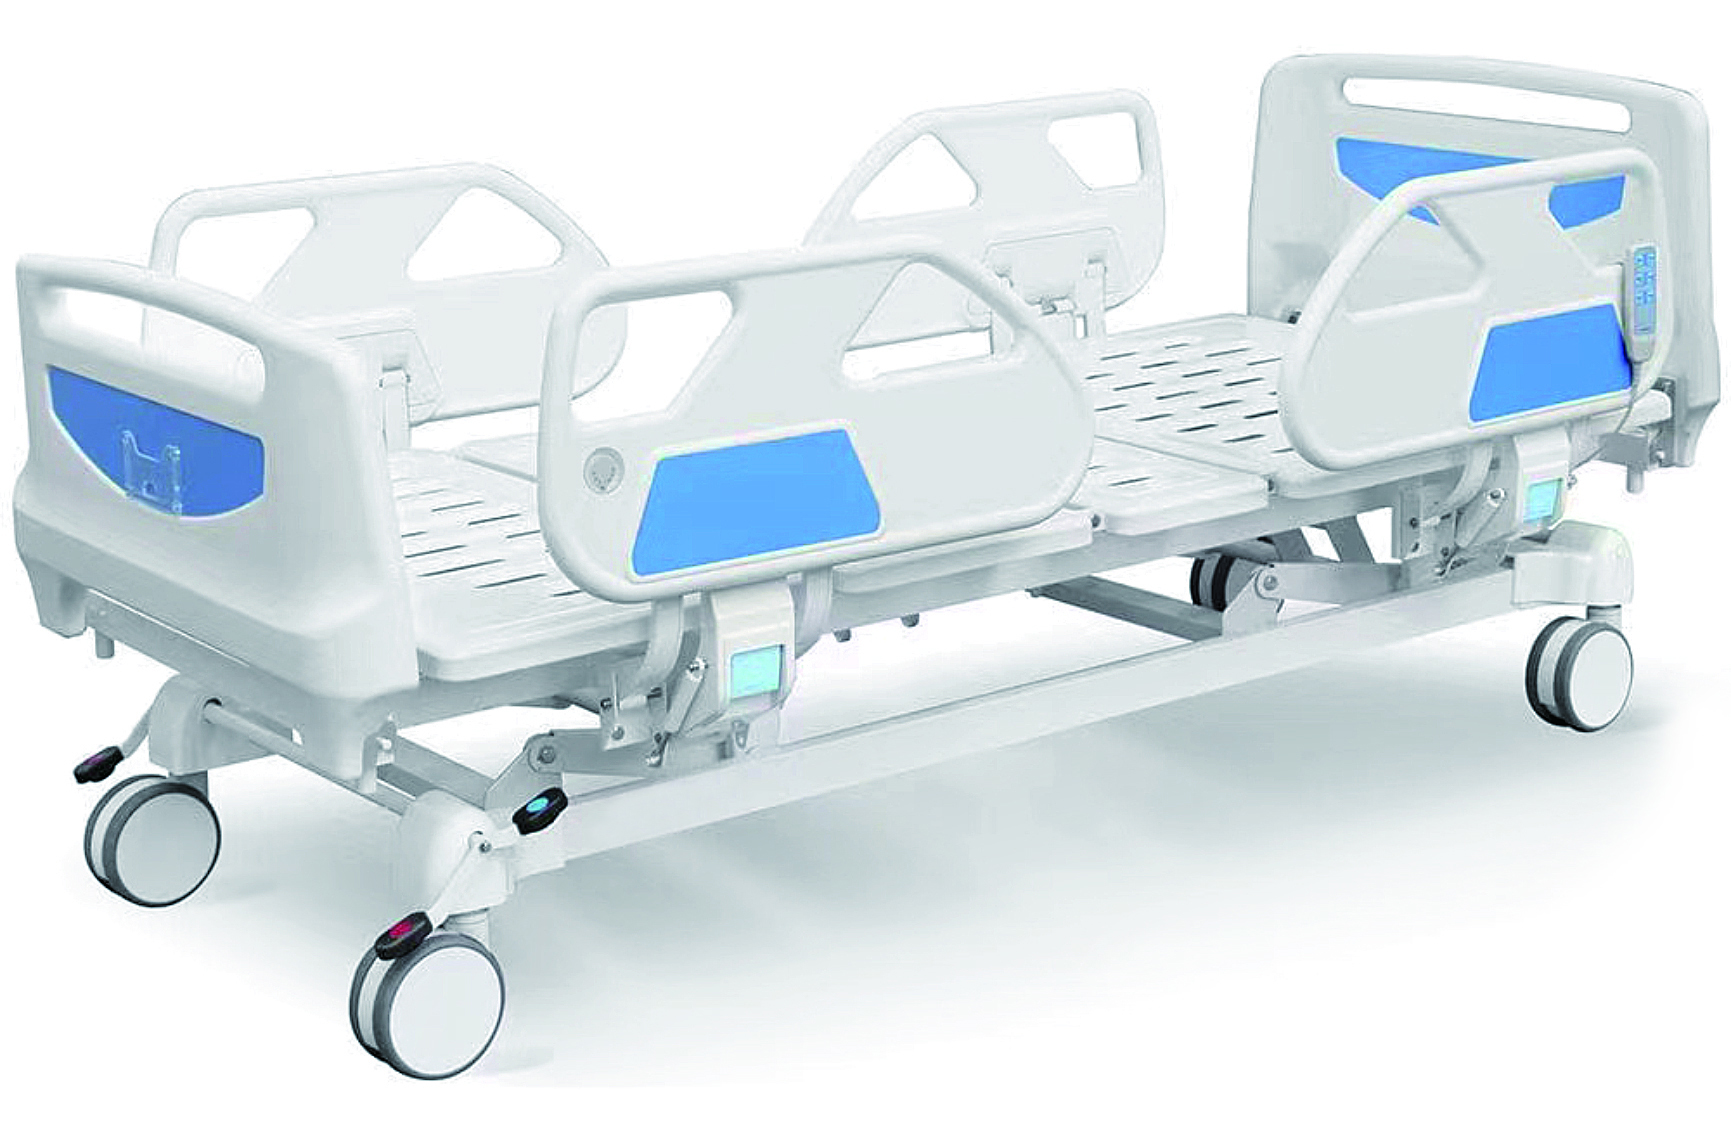 The difference between fully electric and semi-electric medical beds